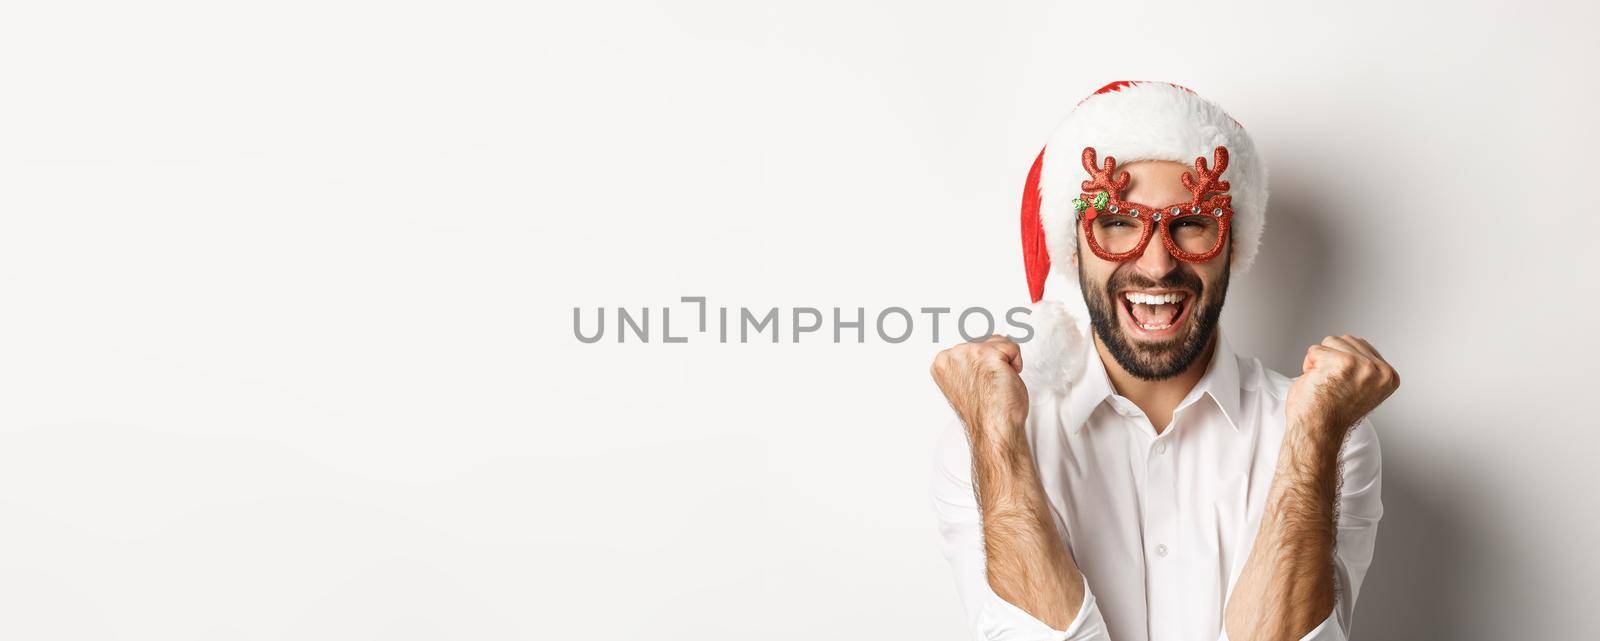 Close-up of man celebrating christmas or new year, wearing xmas party glasses and santa hat, rejoicing and shouting of joy, standing over white background.